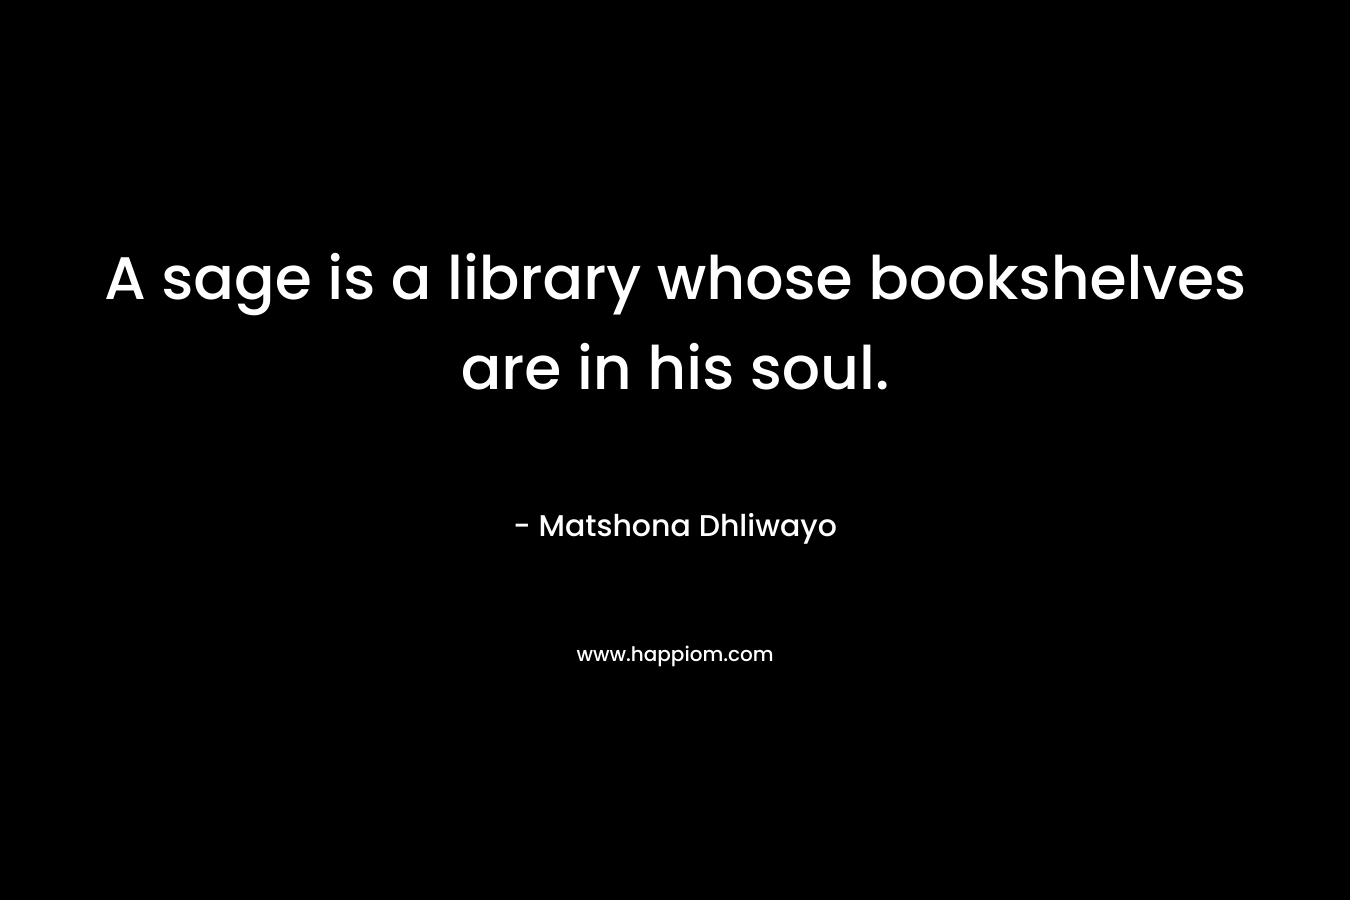 A sage is a library whose bookshelves are in his soul. – Matshona Dhliwayo